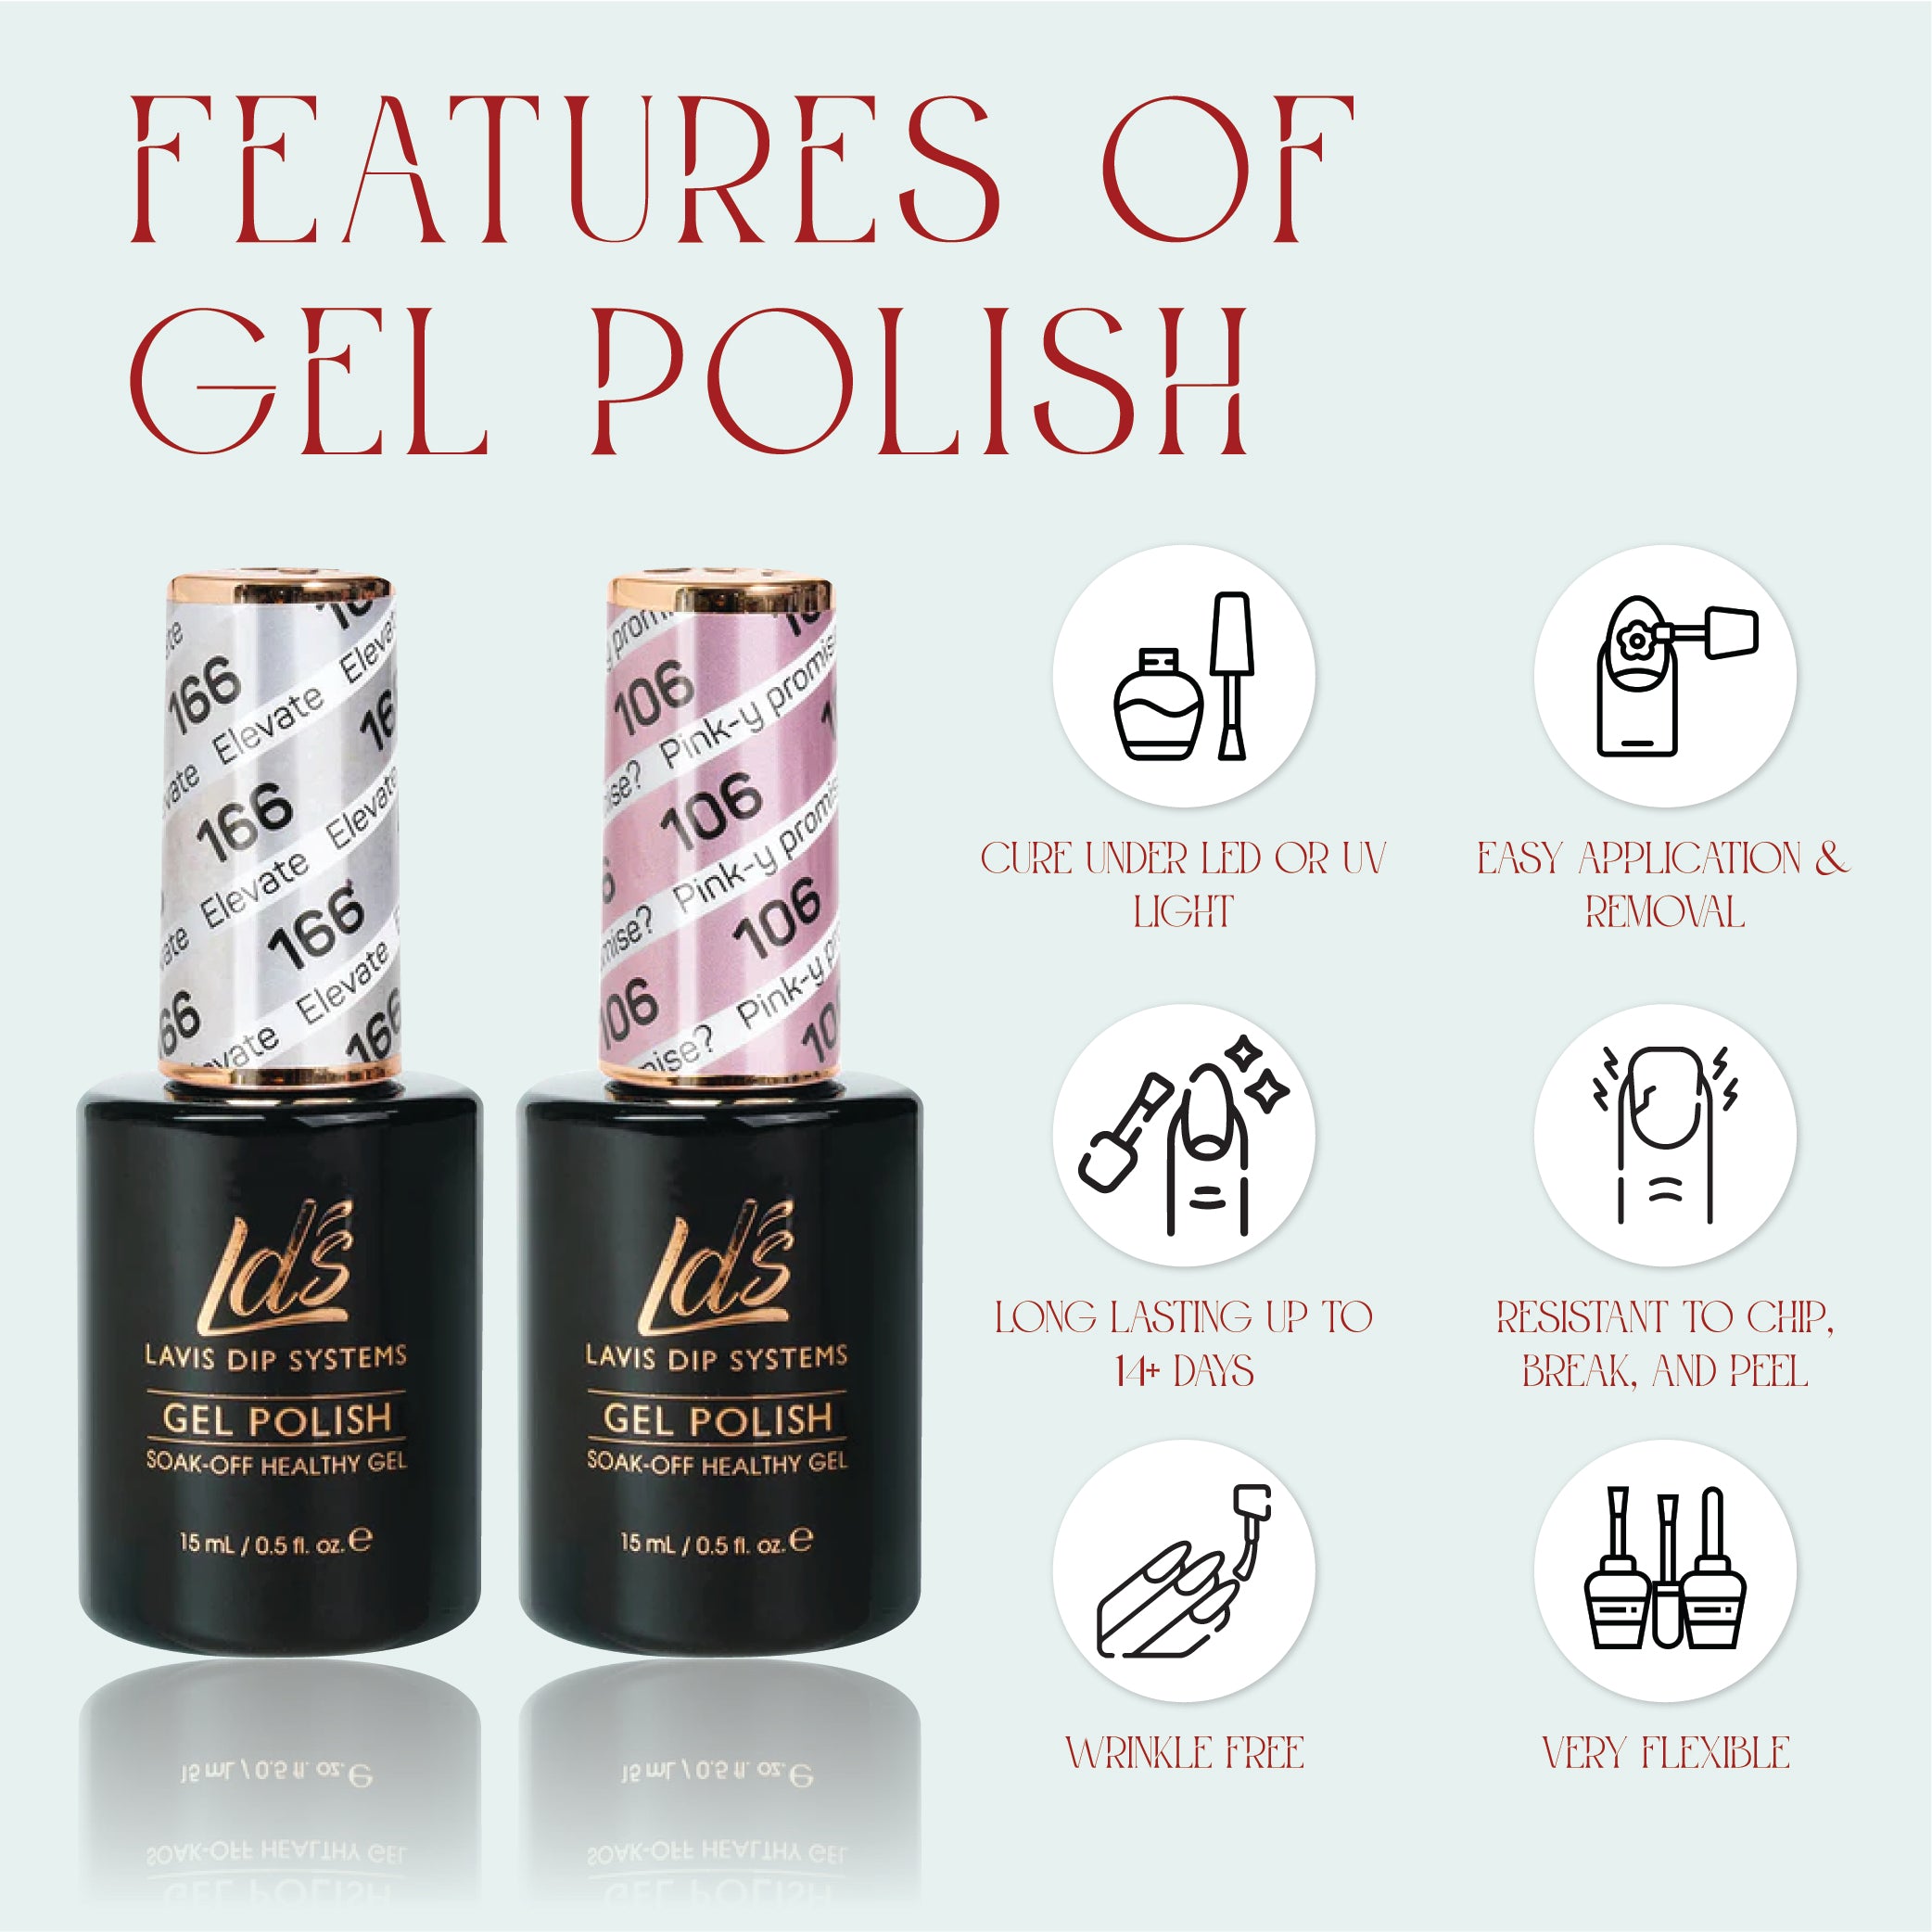 LDS Gel Nail Polish Duo - 111 Blue Colors - Nothing But Blue Skies